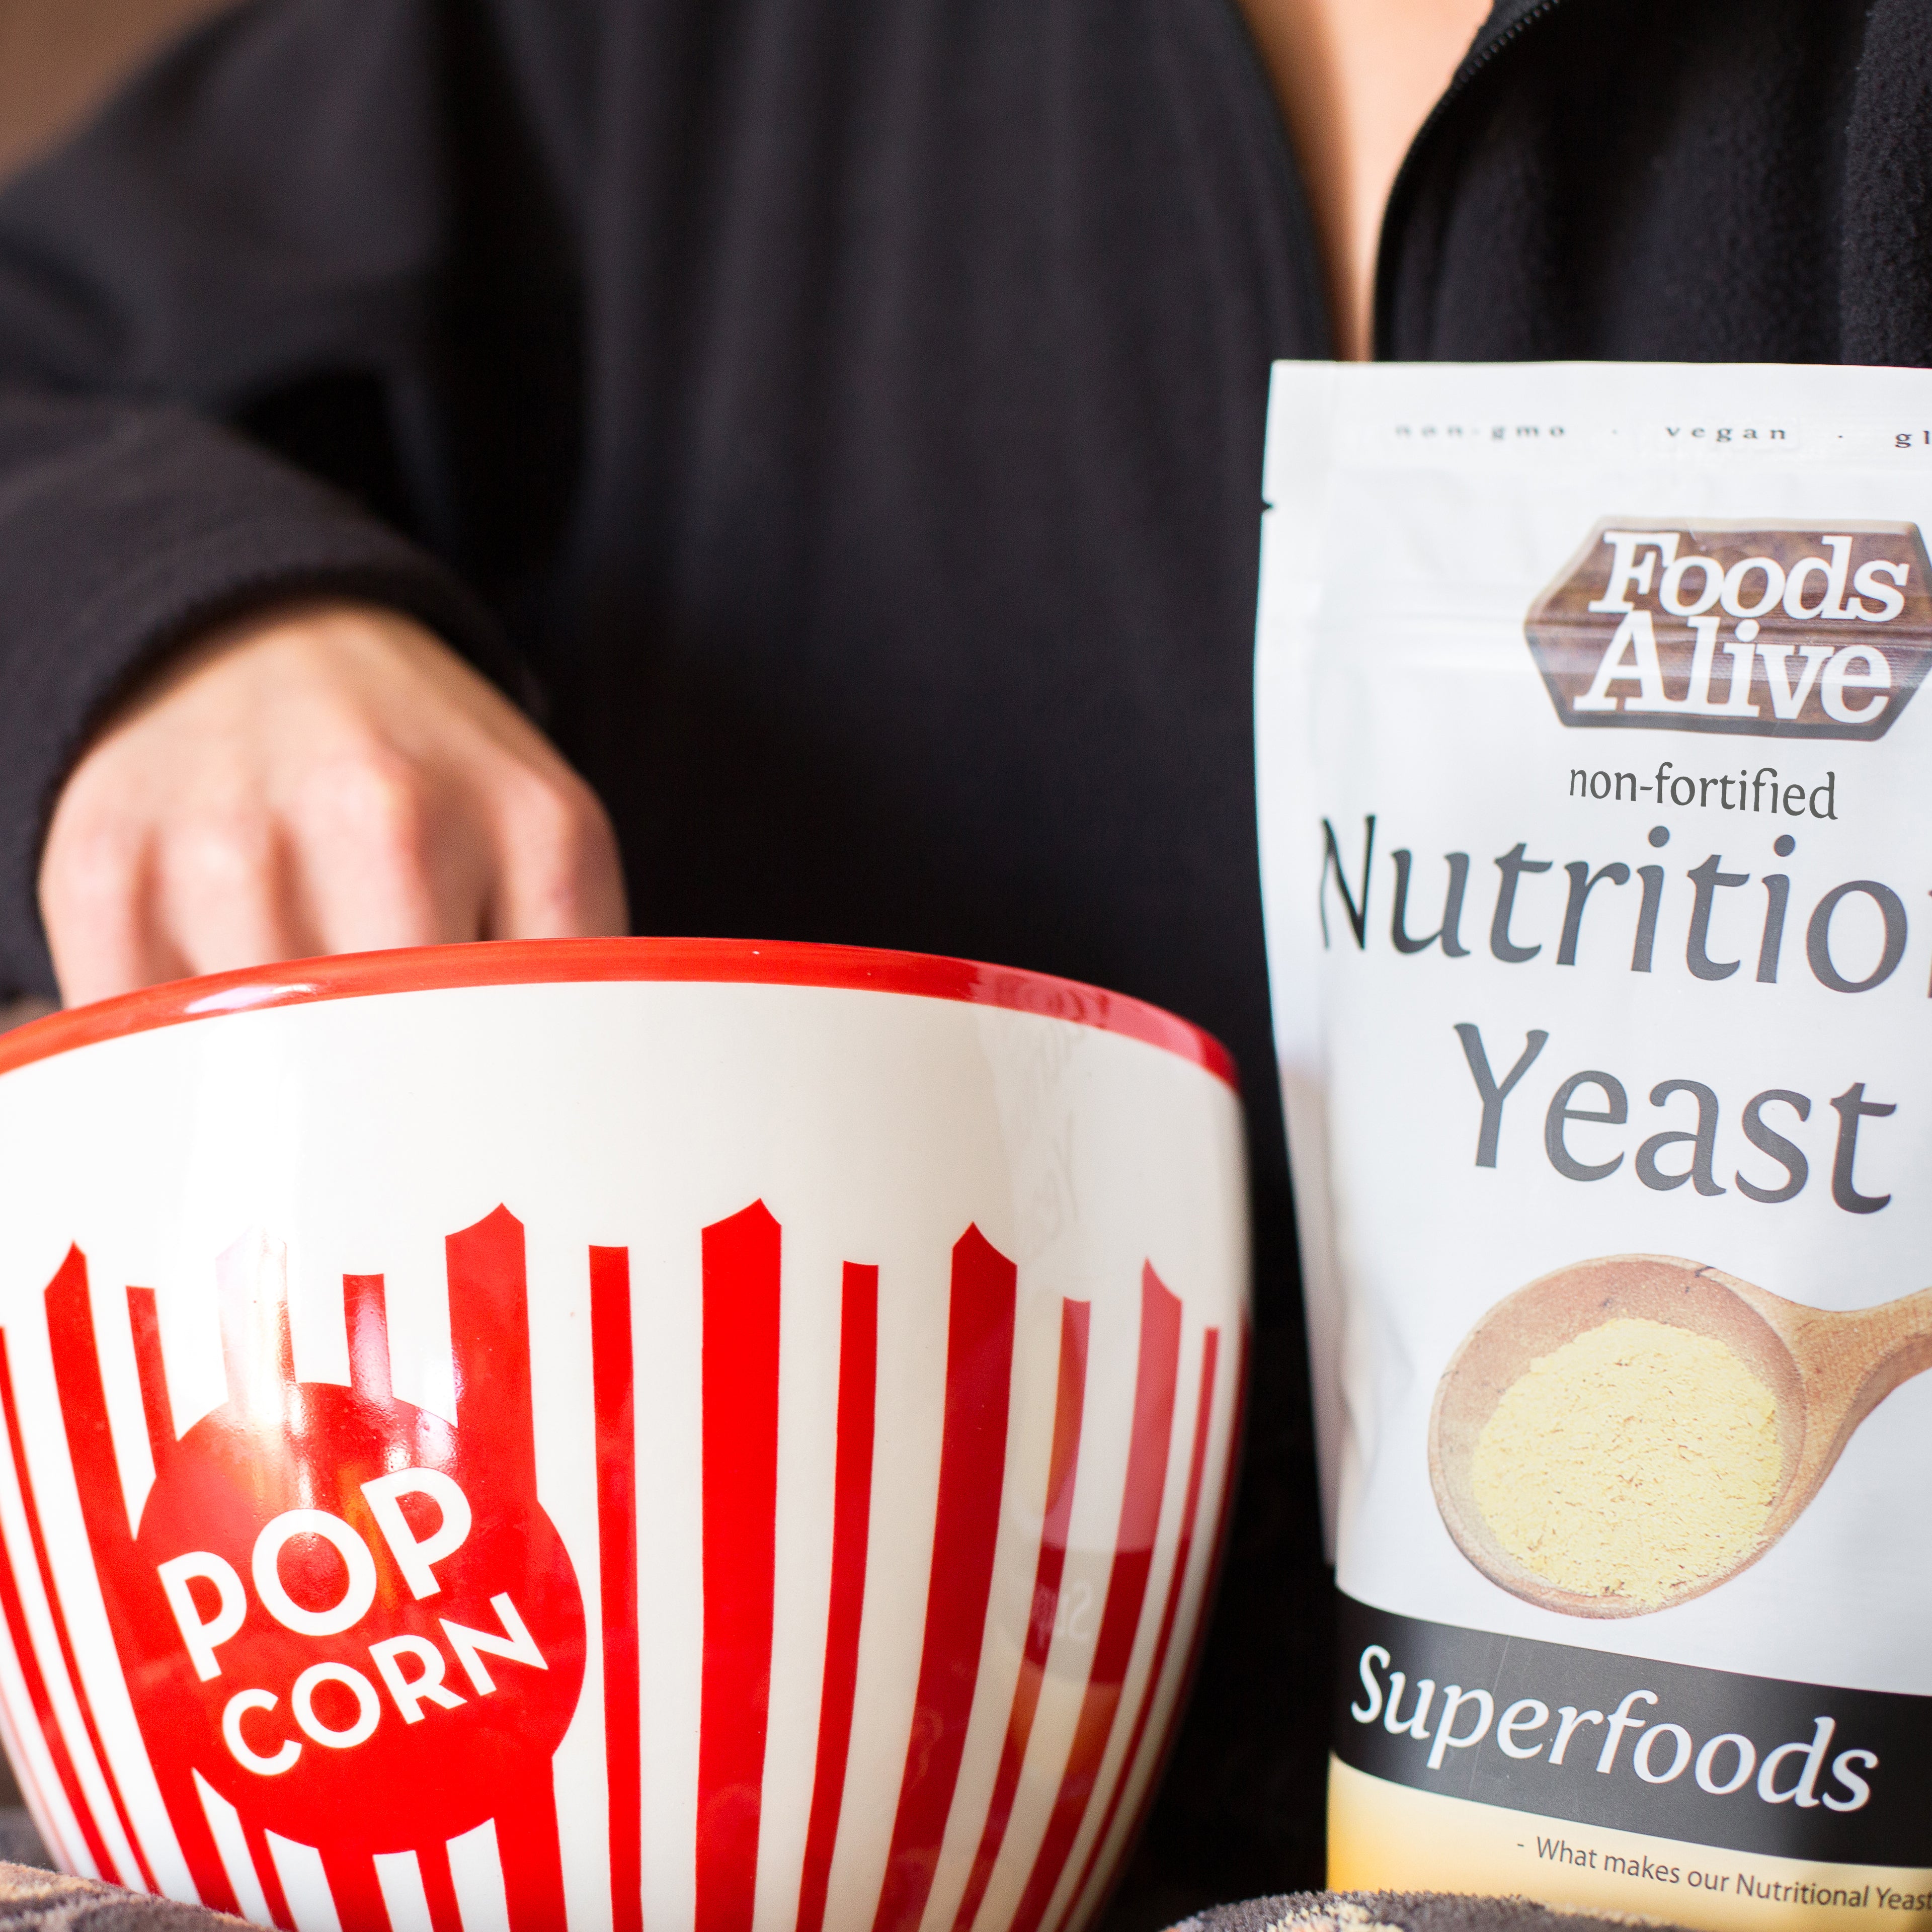 Foods Alive Nutritional Yeast Recipe - Popcorn - Non-Fortified